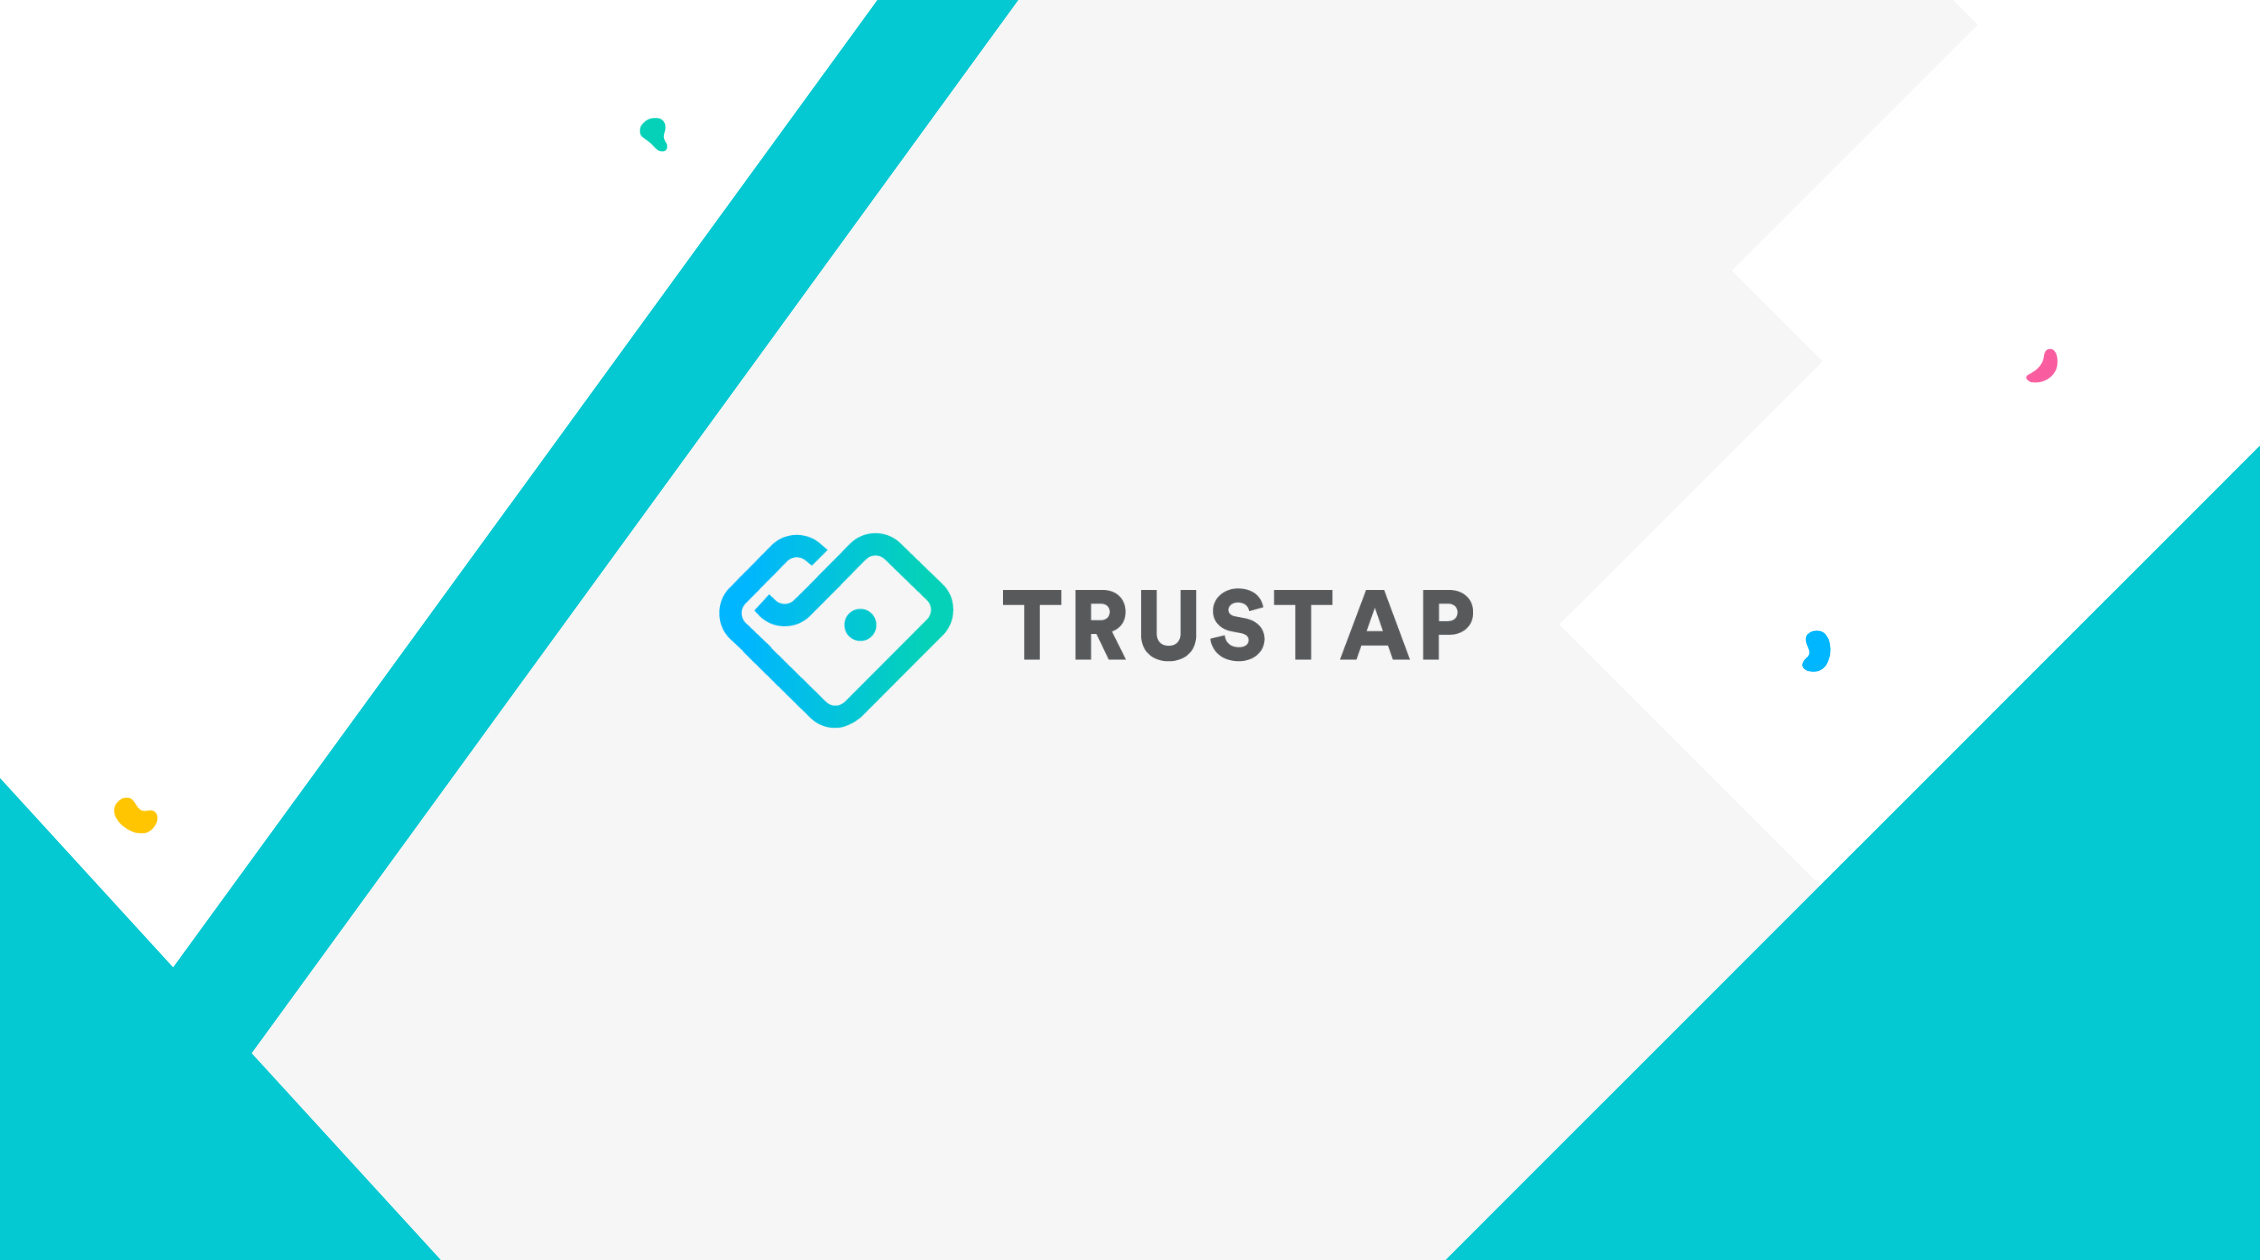 Trustap Raises $3.4m To Bring Confidence and Security to Online Transactions